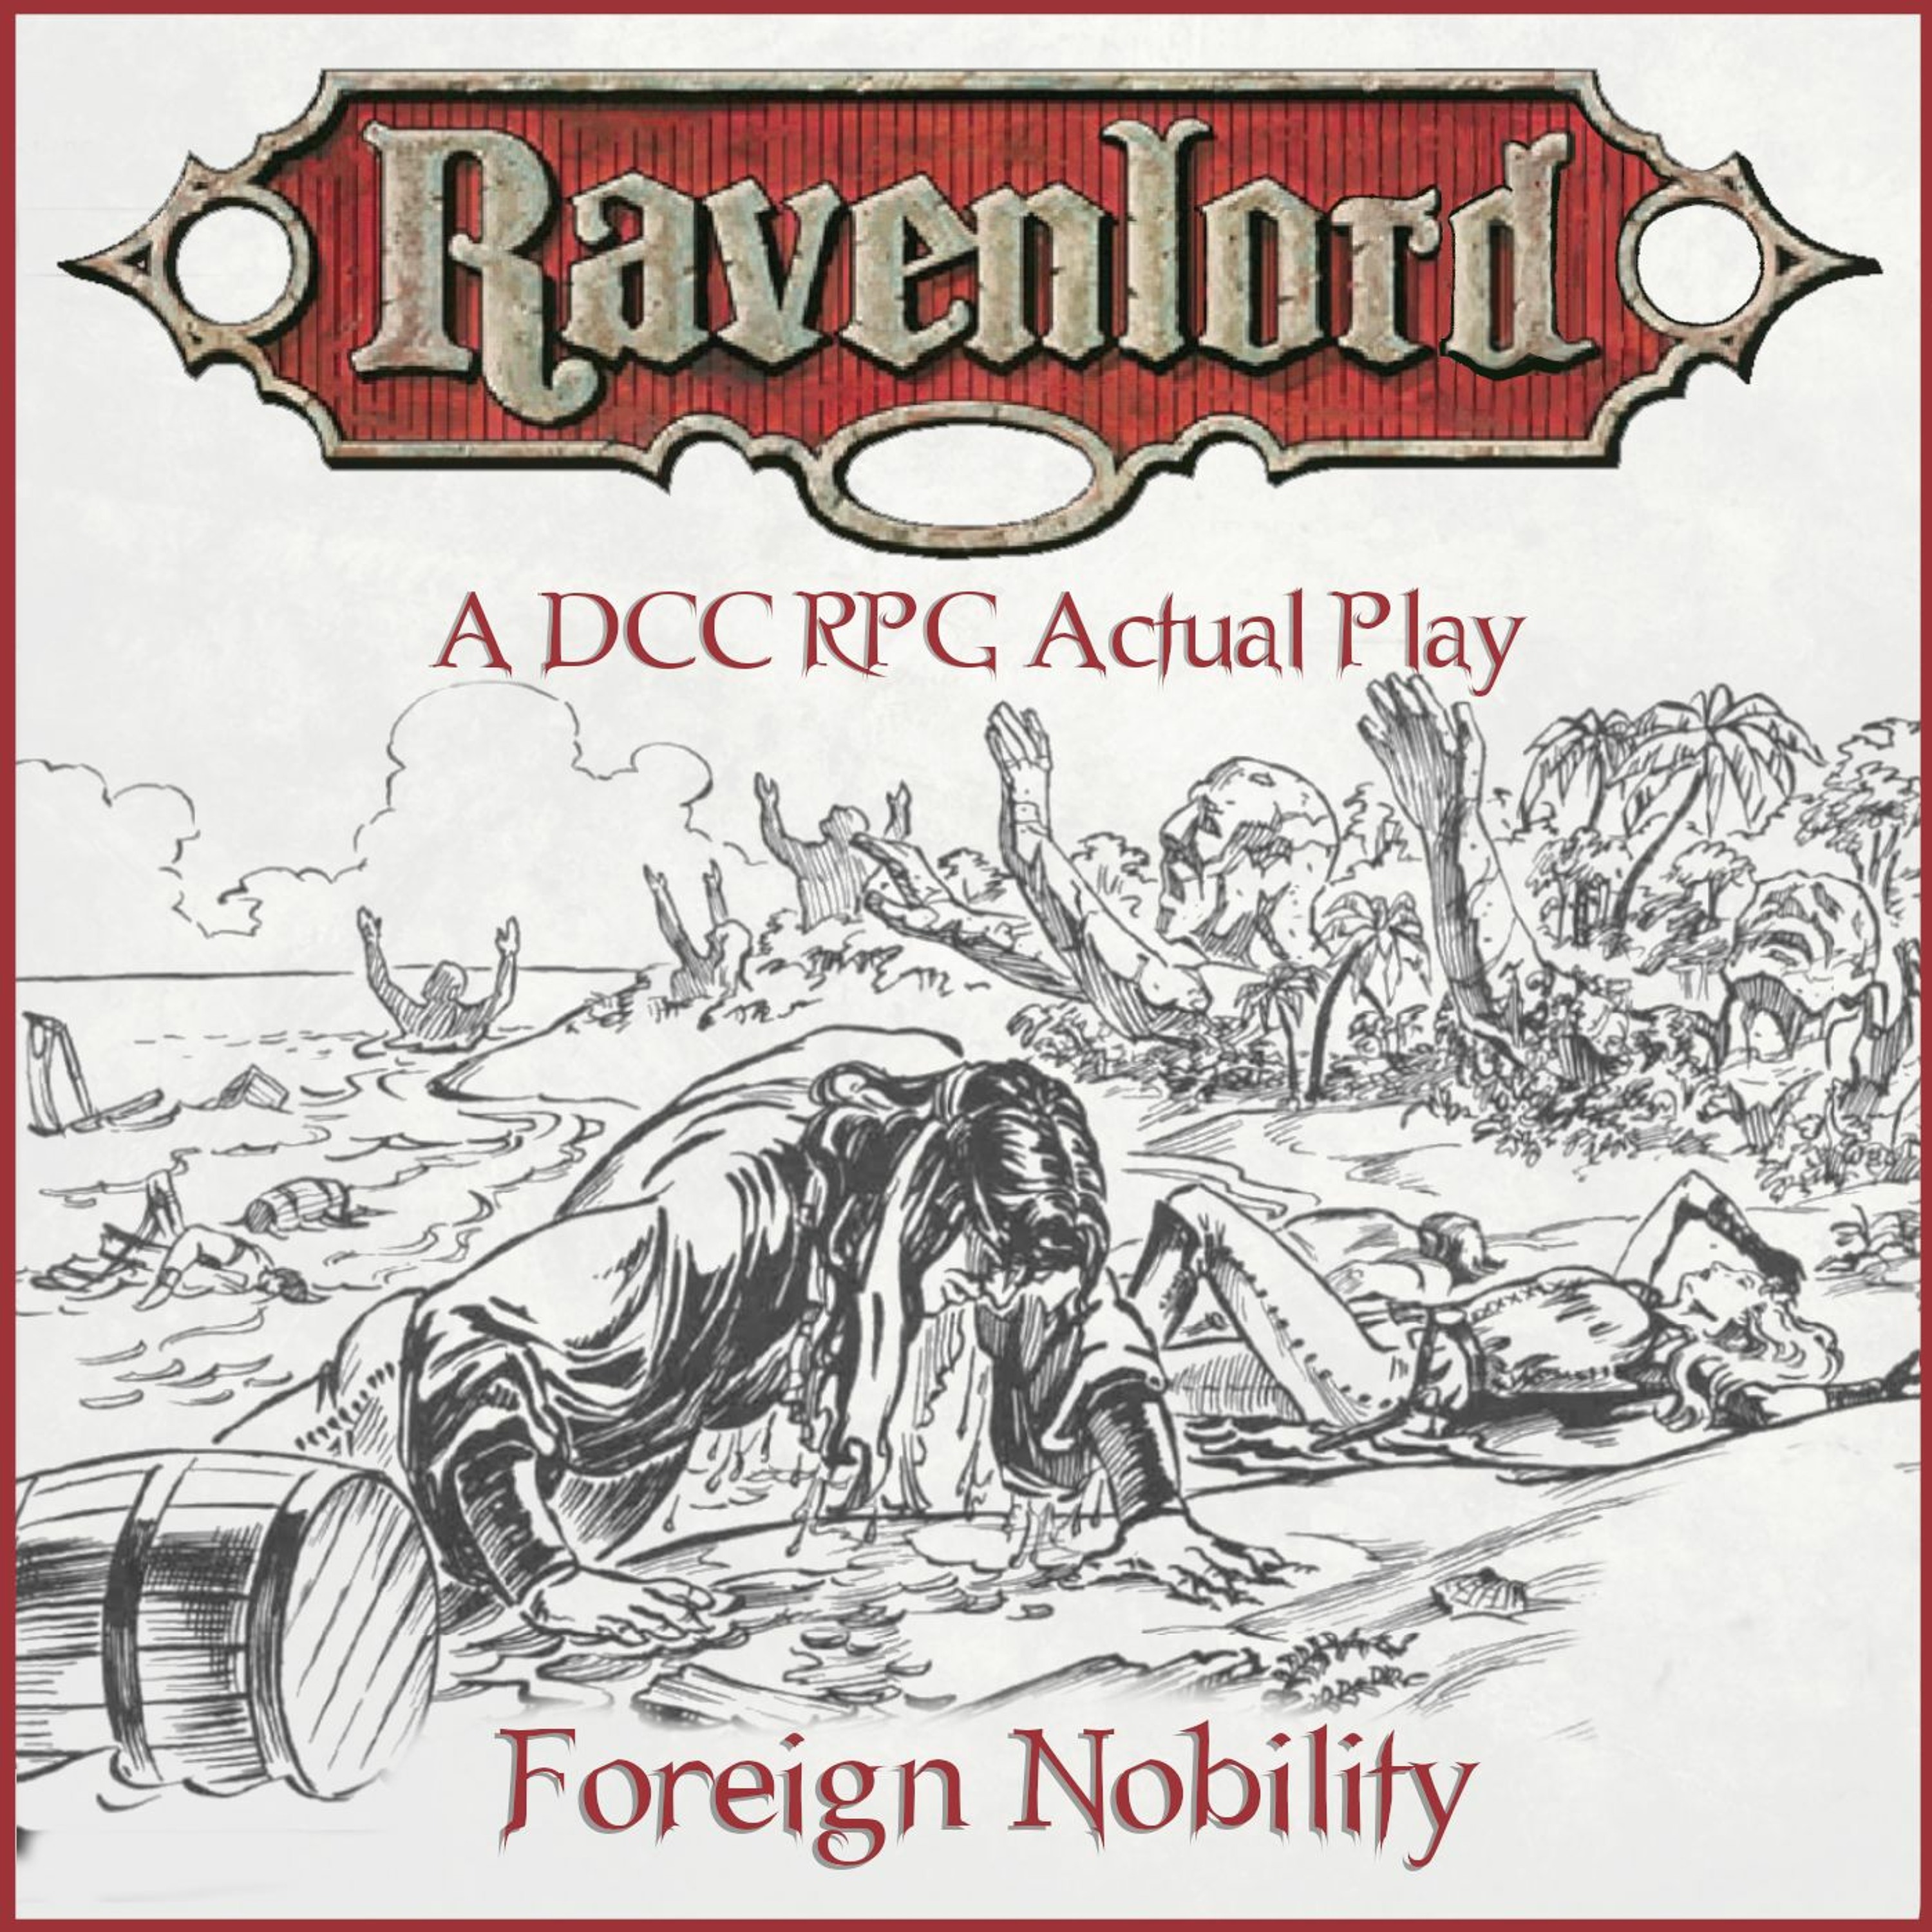 Ravenlord 01 -  Foreign Nobility [DCC RPG Actual Play]